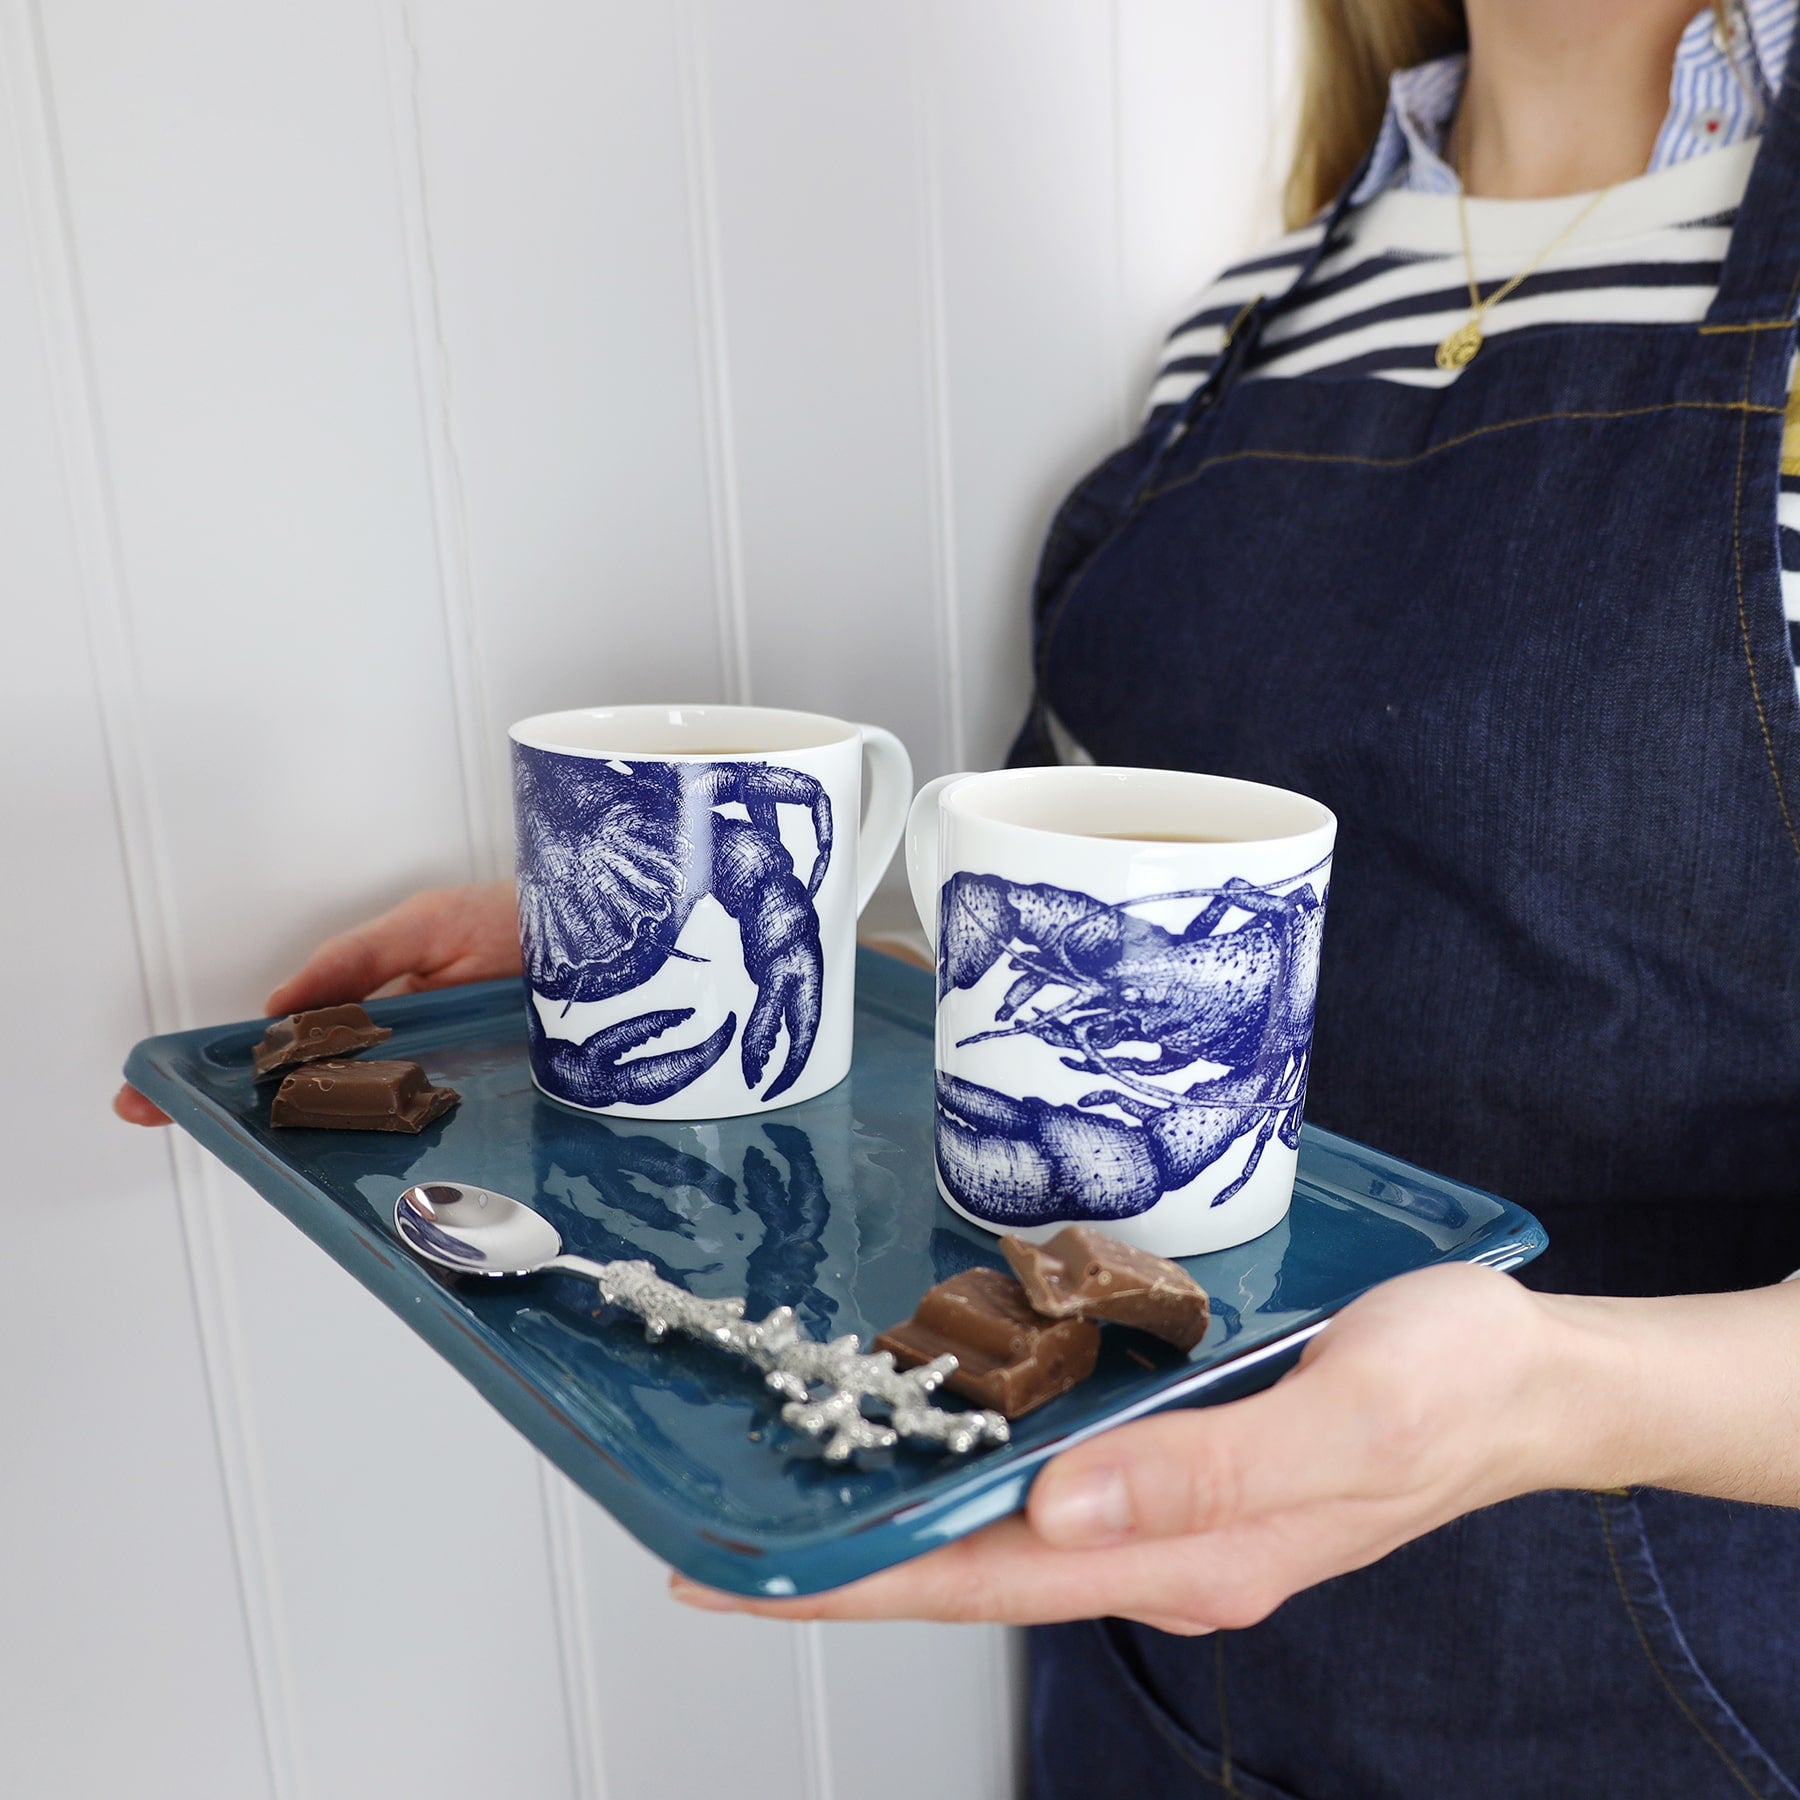 The photo shows Bone china white mug featuring hand drawn lobster design in classic Navy on a tray with a crab design mug,some chocolate and a pewter spoon